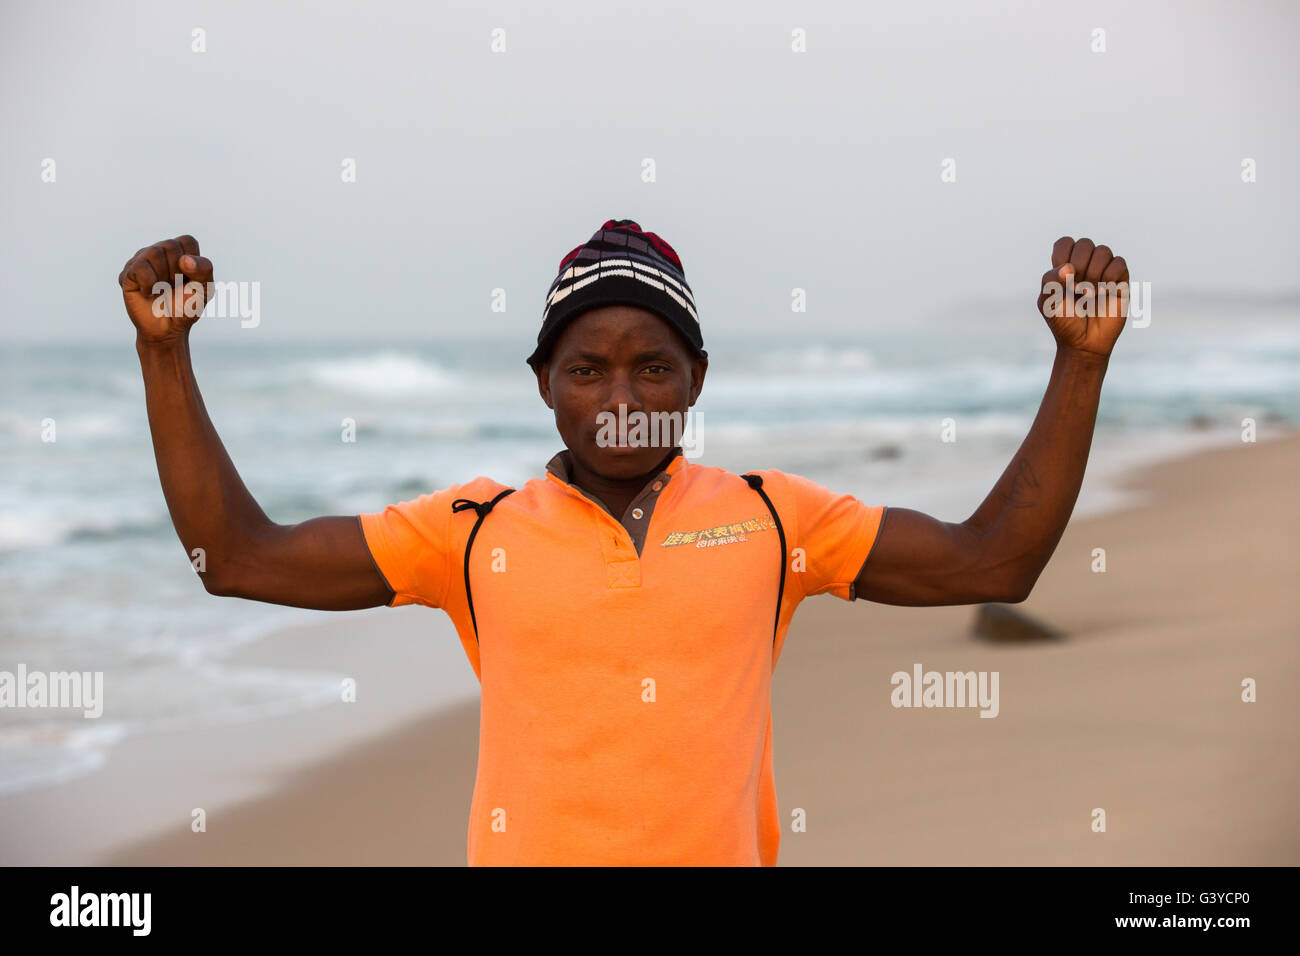 Mozambique local man standing on the beach facing the camera with fists clenched showing his strength Stock Photo